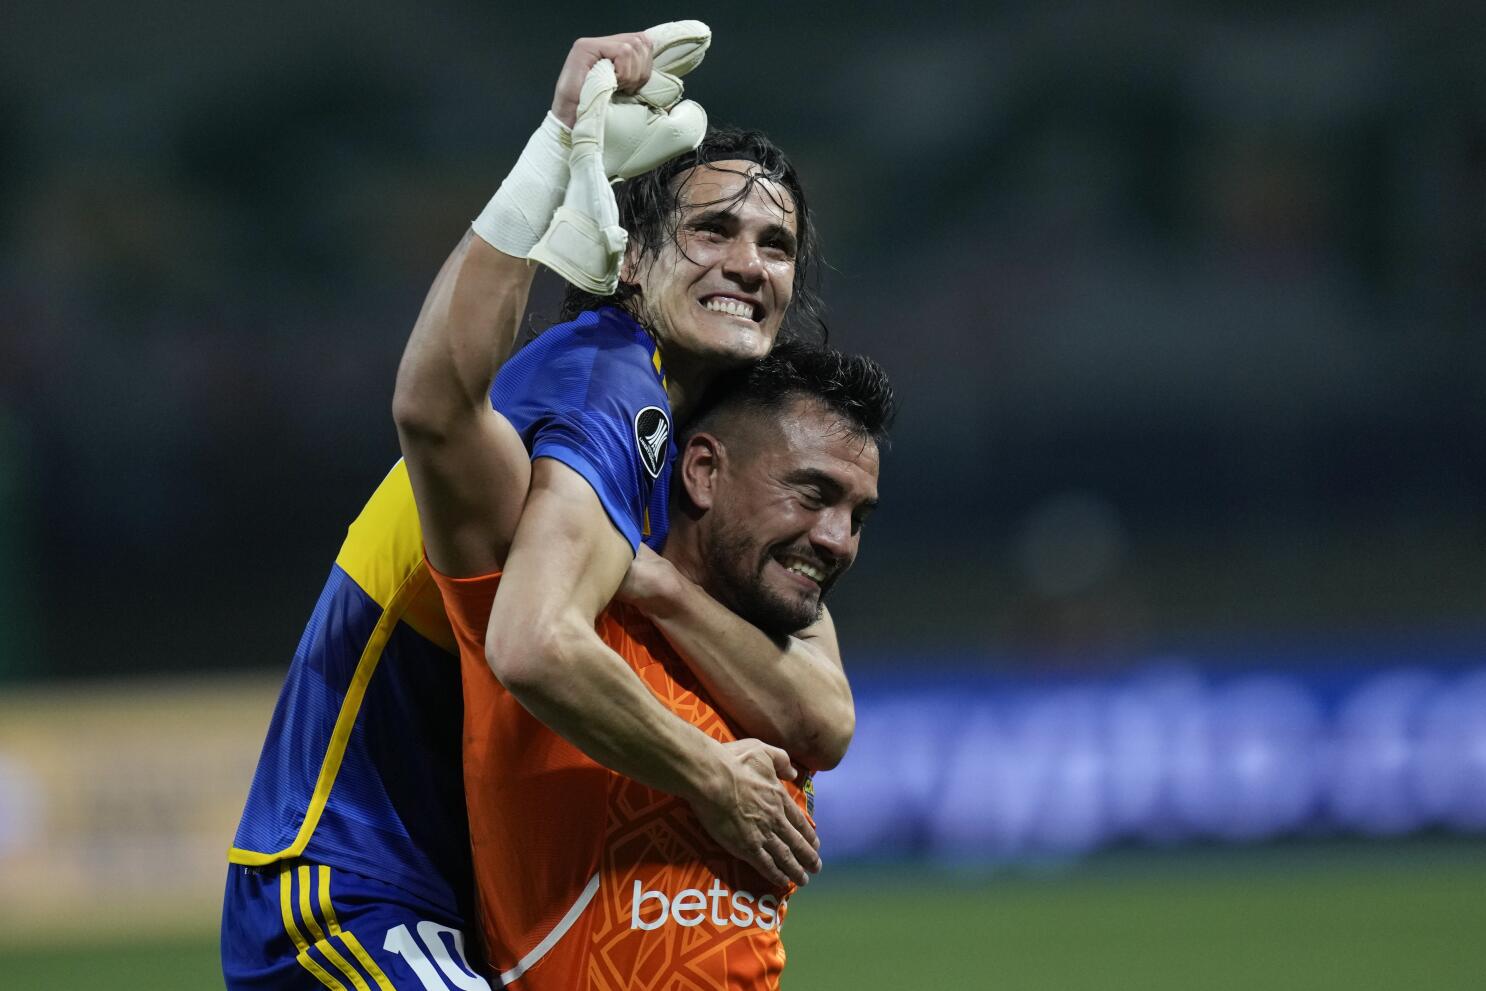 B/R Football on X: Boca Juniors reached the Copa Libertadores final last  night after beating Palmeiras on penalties, with Edinson Cavani scoring and  Marcos Rojo sent off 💥 They'll face Fluminense on